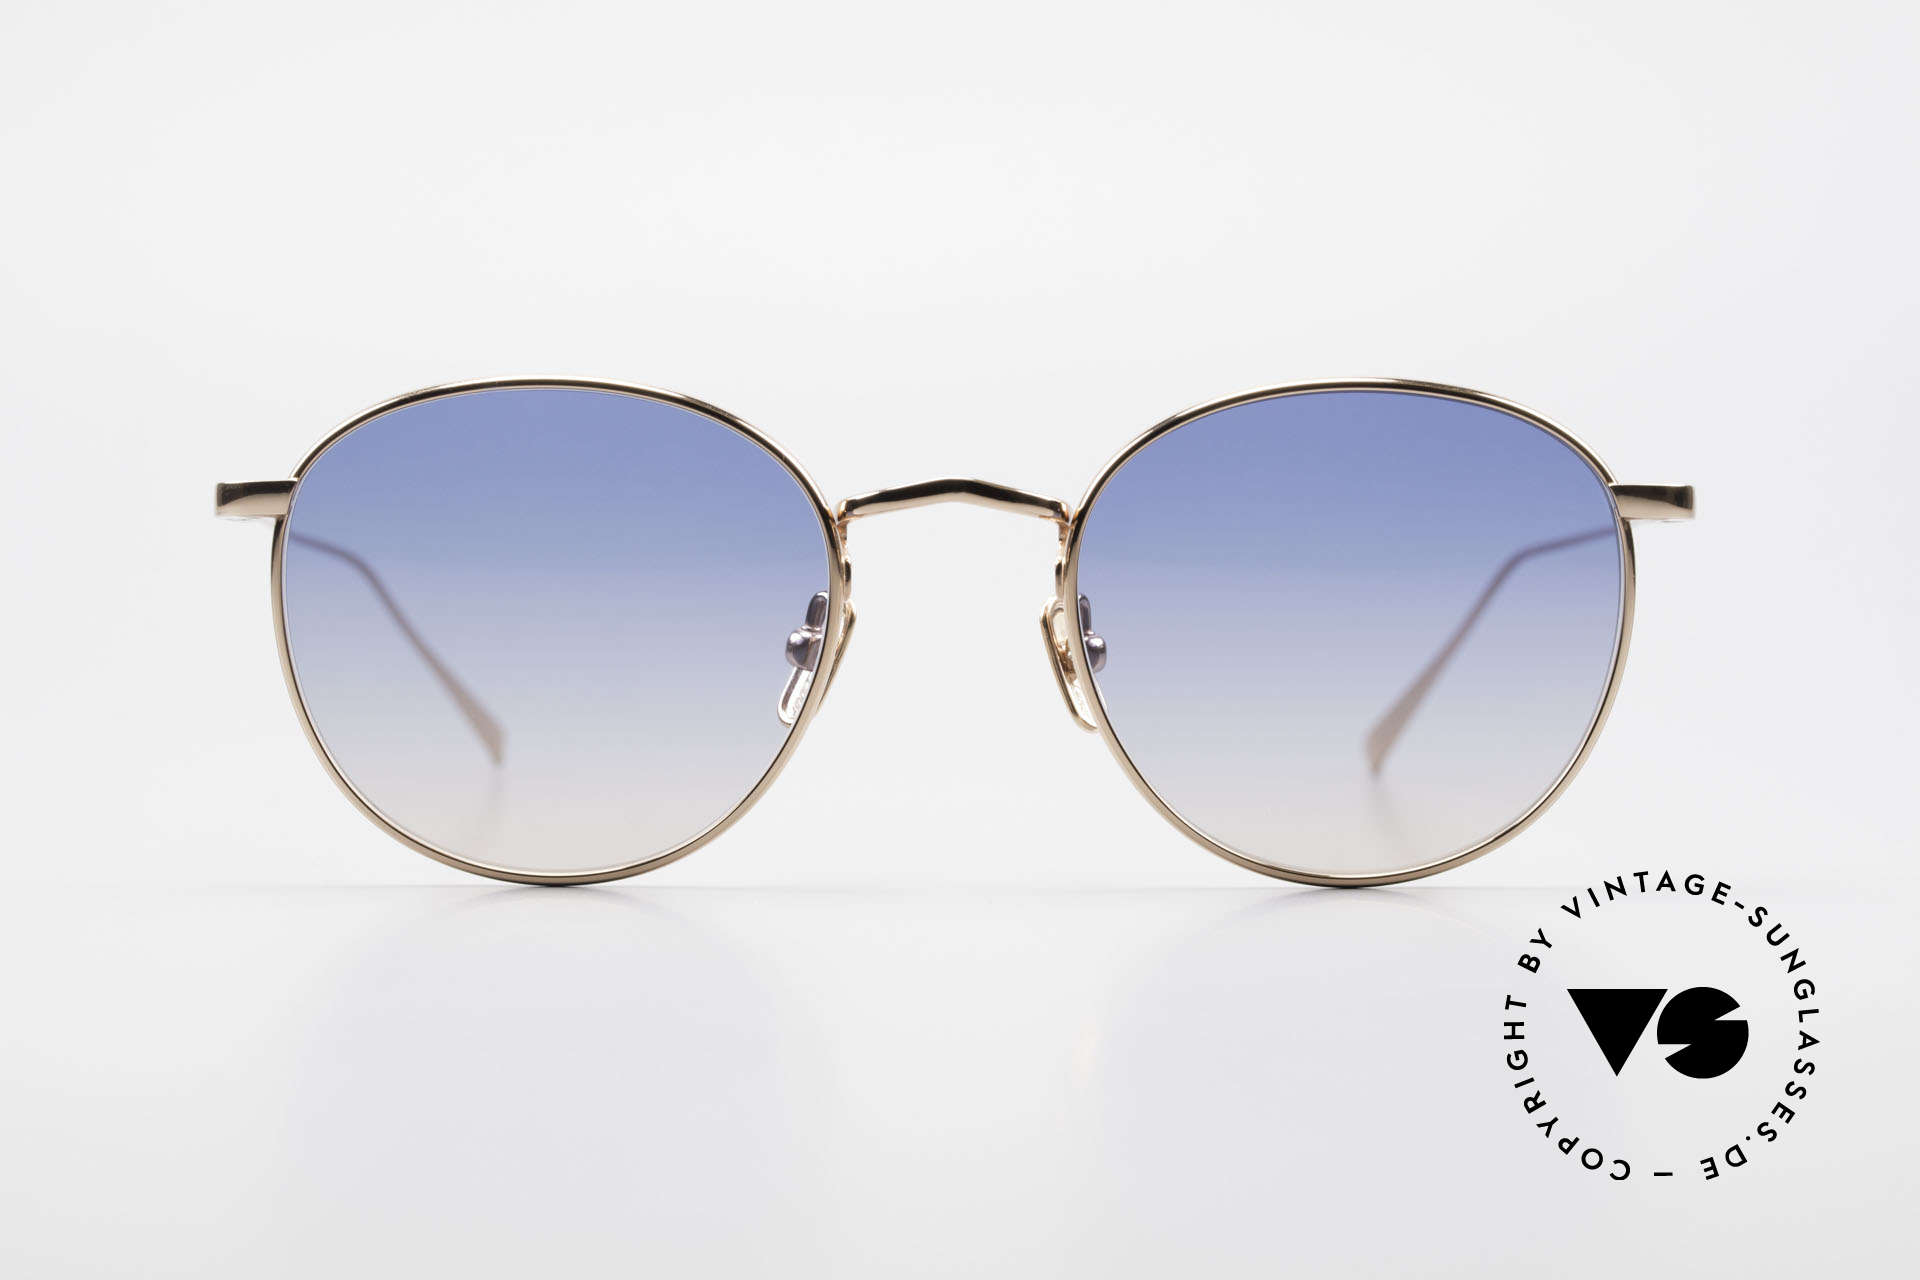 Lunor M9 Mod 01 RG Titan Sunglasses Rose Gold, without ostentatious logos (but in a timeless elegance), Made for Men and Women